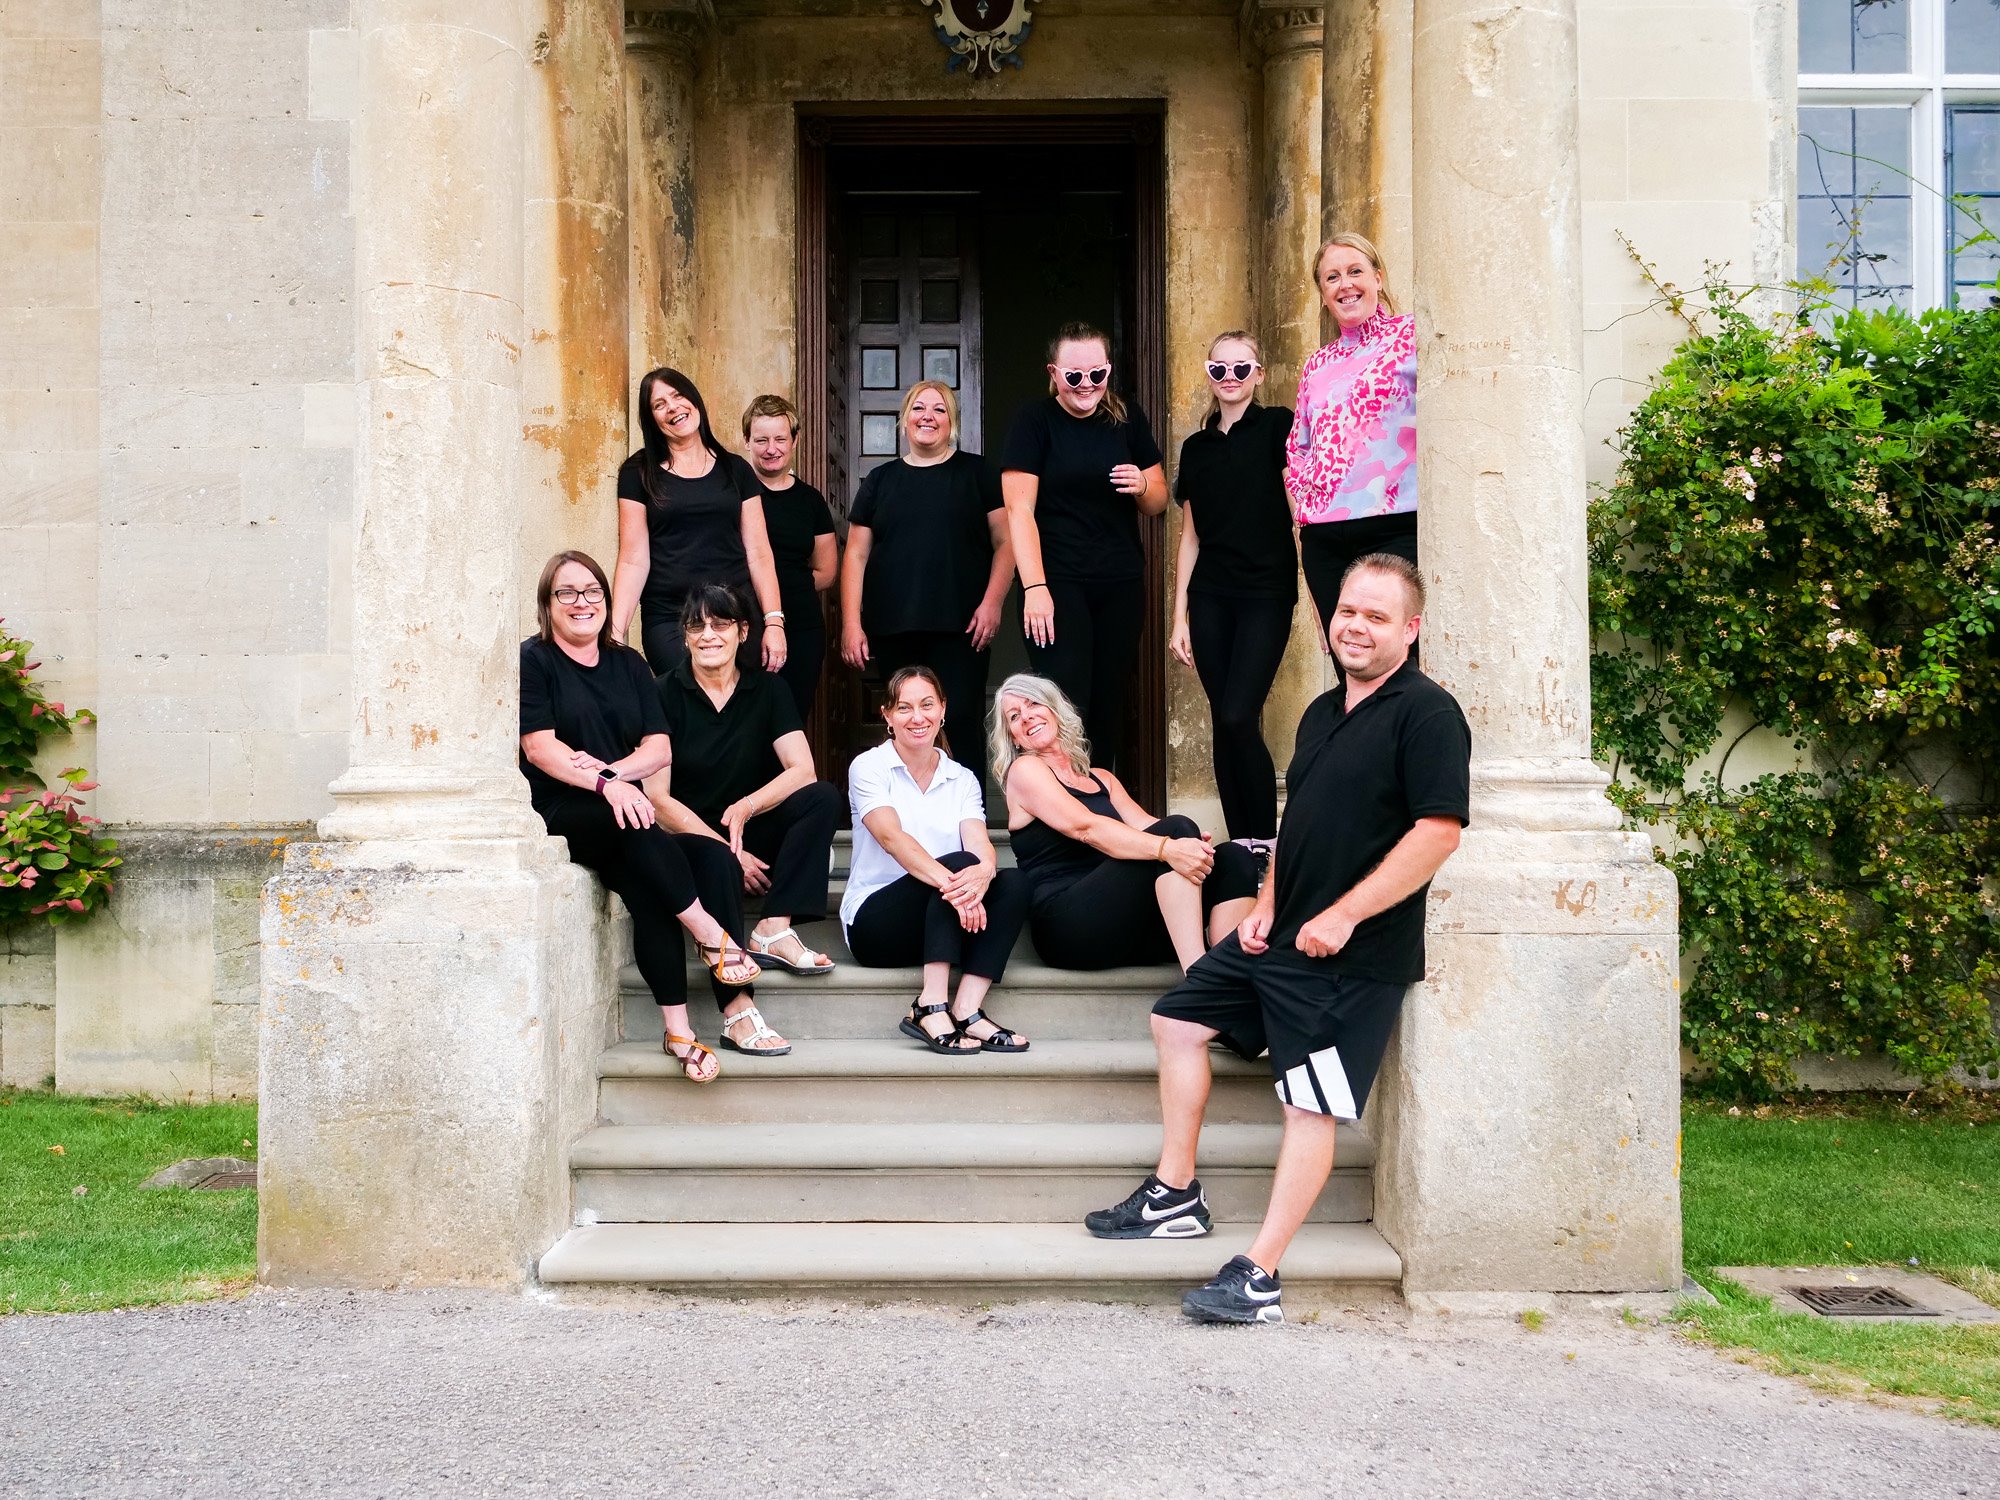 meet the team at elmore court stately home wedding venue - here are the housekeeping team on the steps